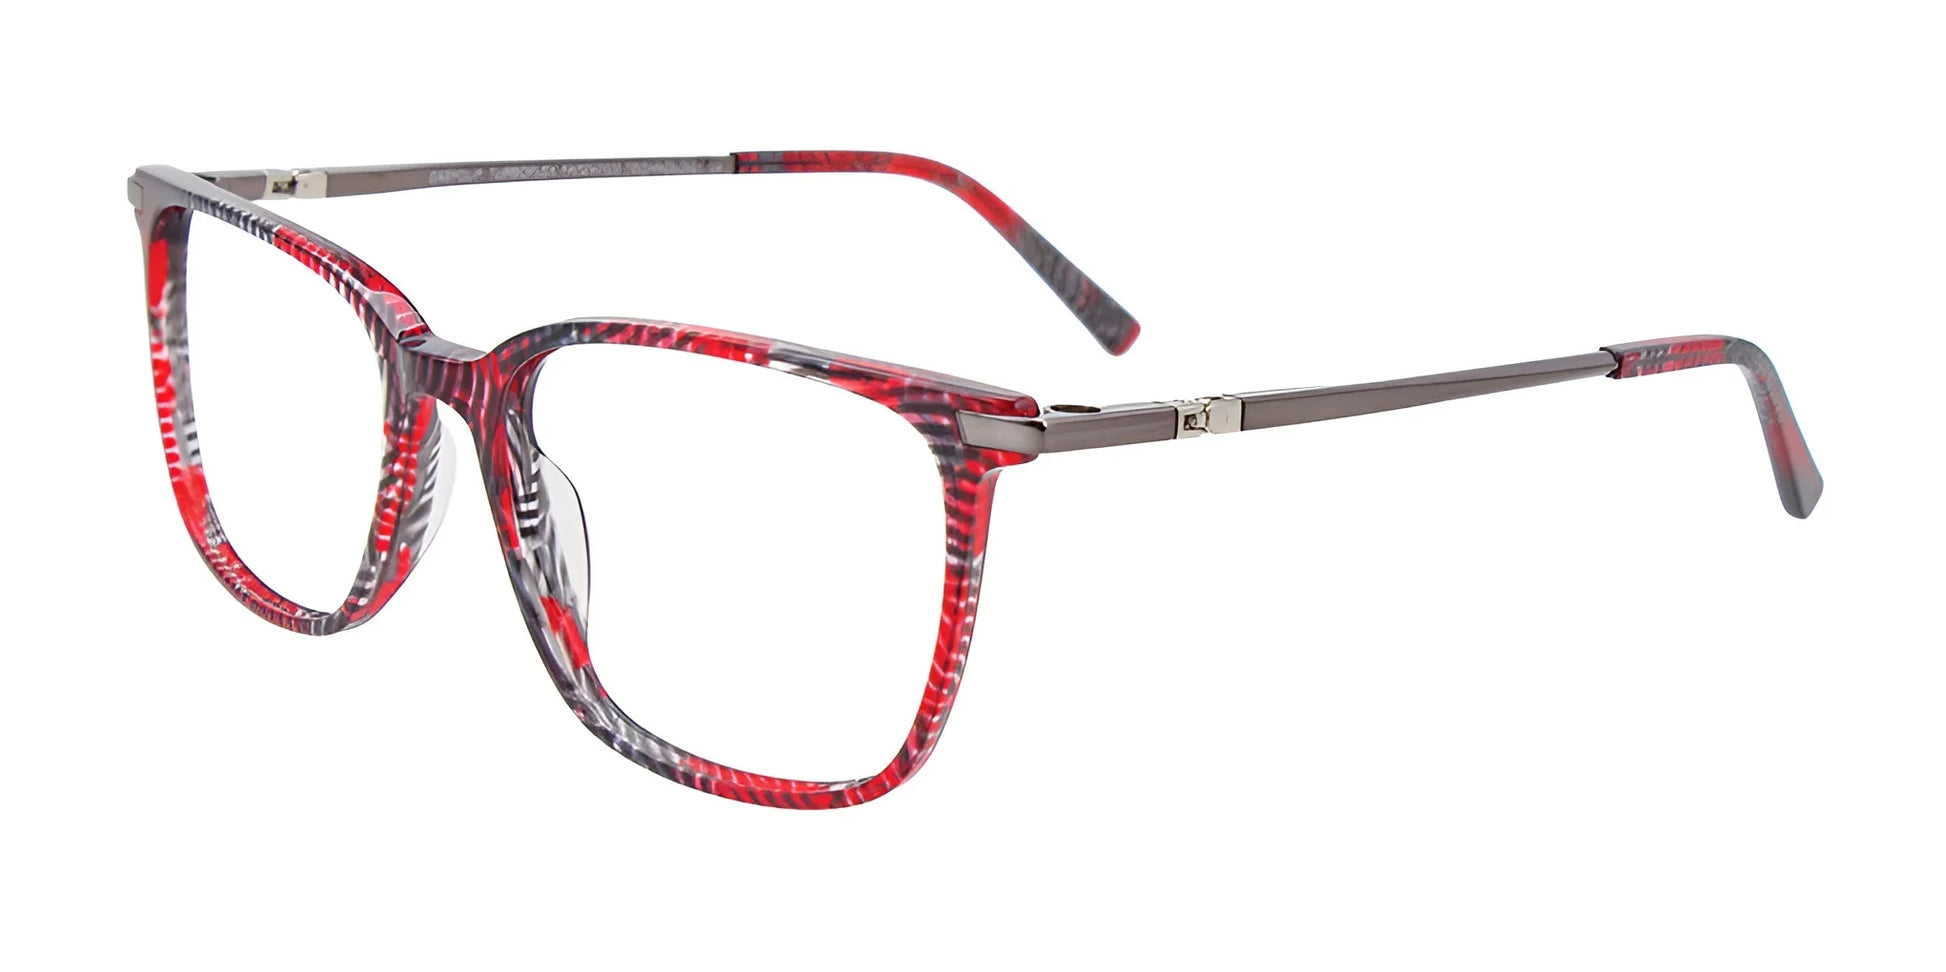 EasyClip EC520 Eyeglasses with Clip-on Sunglasses Red & Black & Grey Marbled